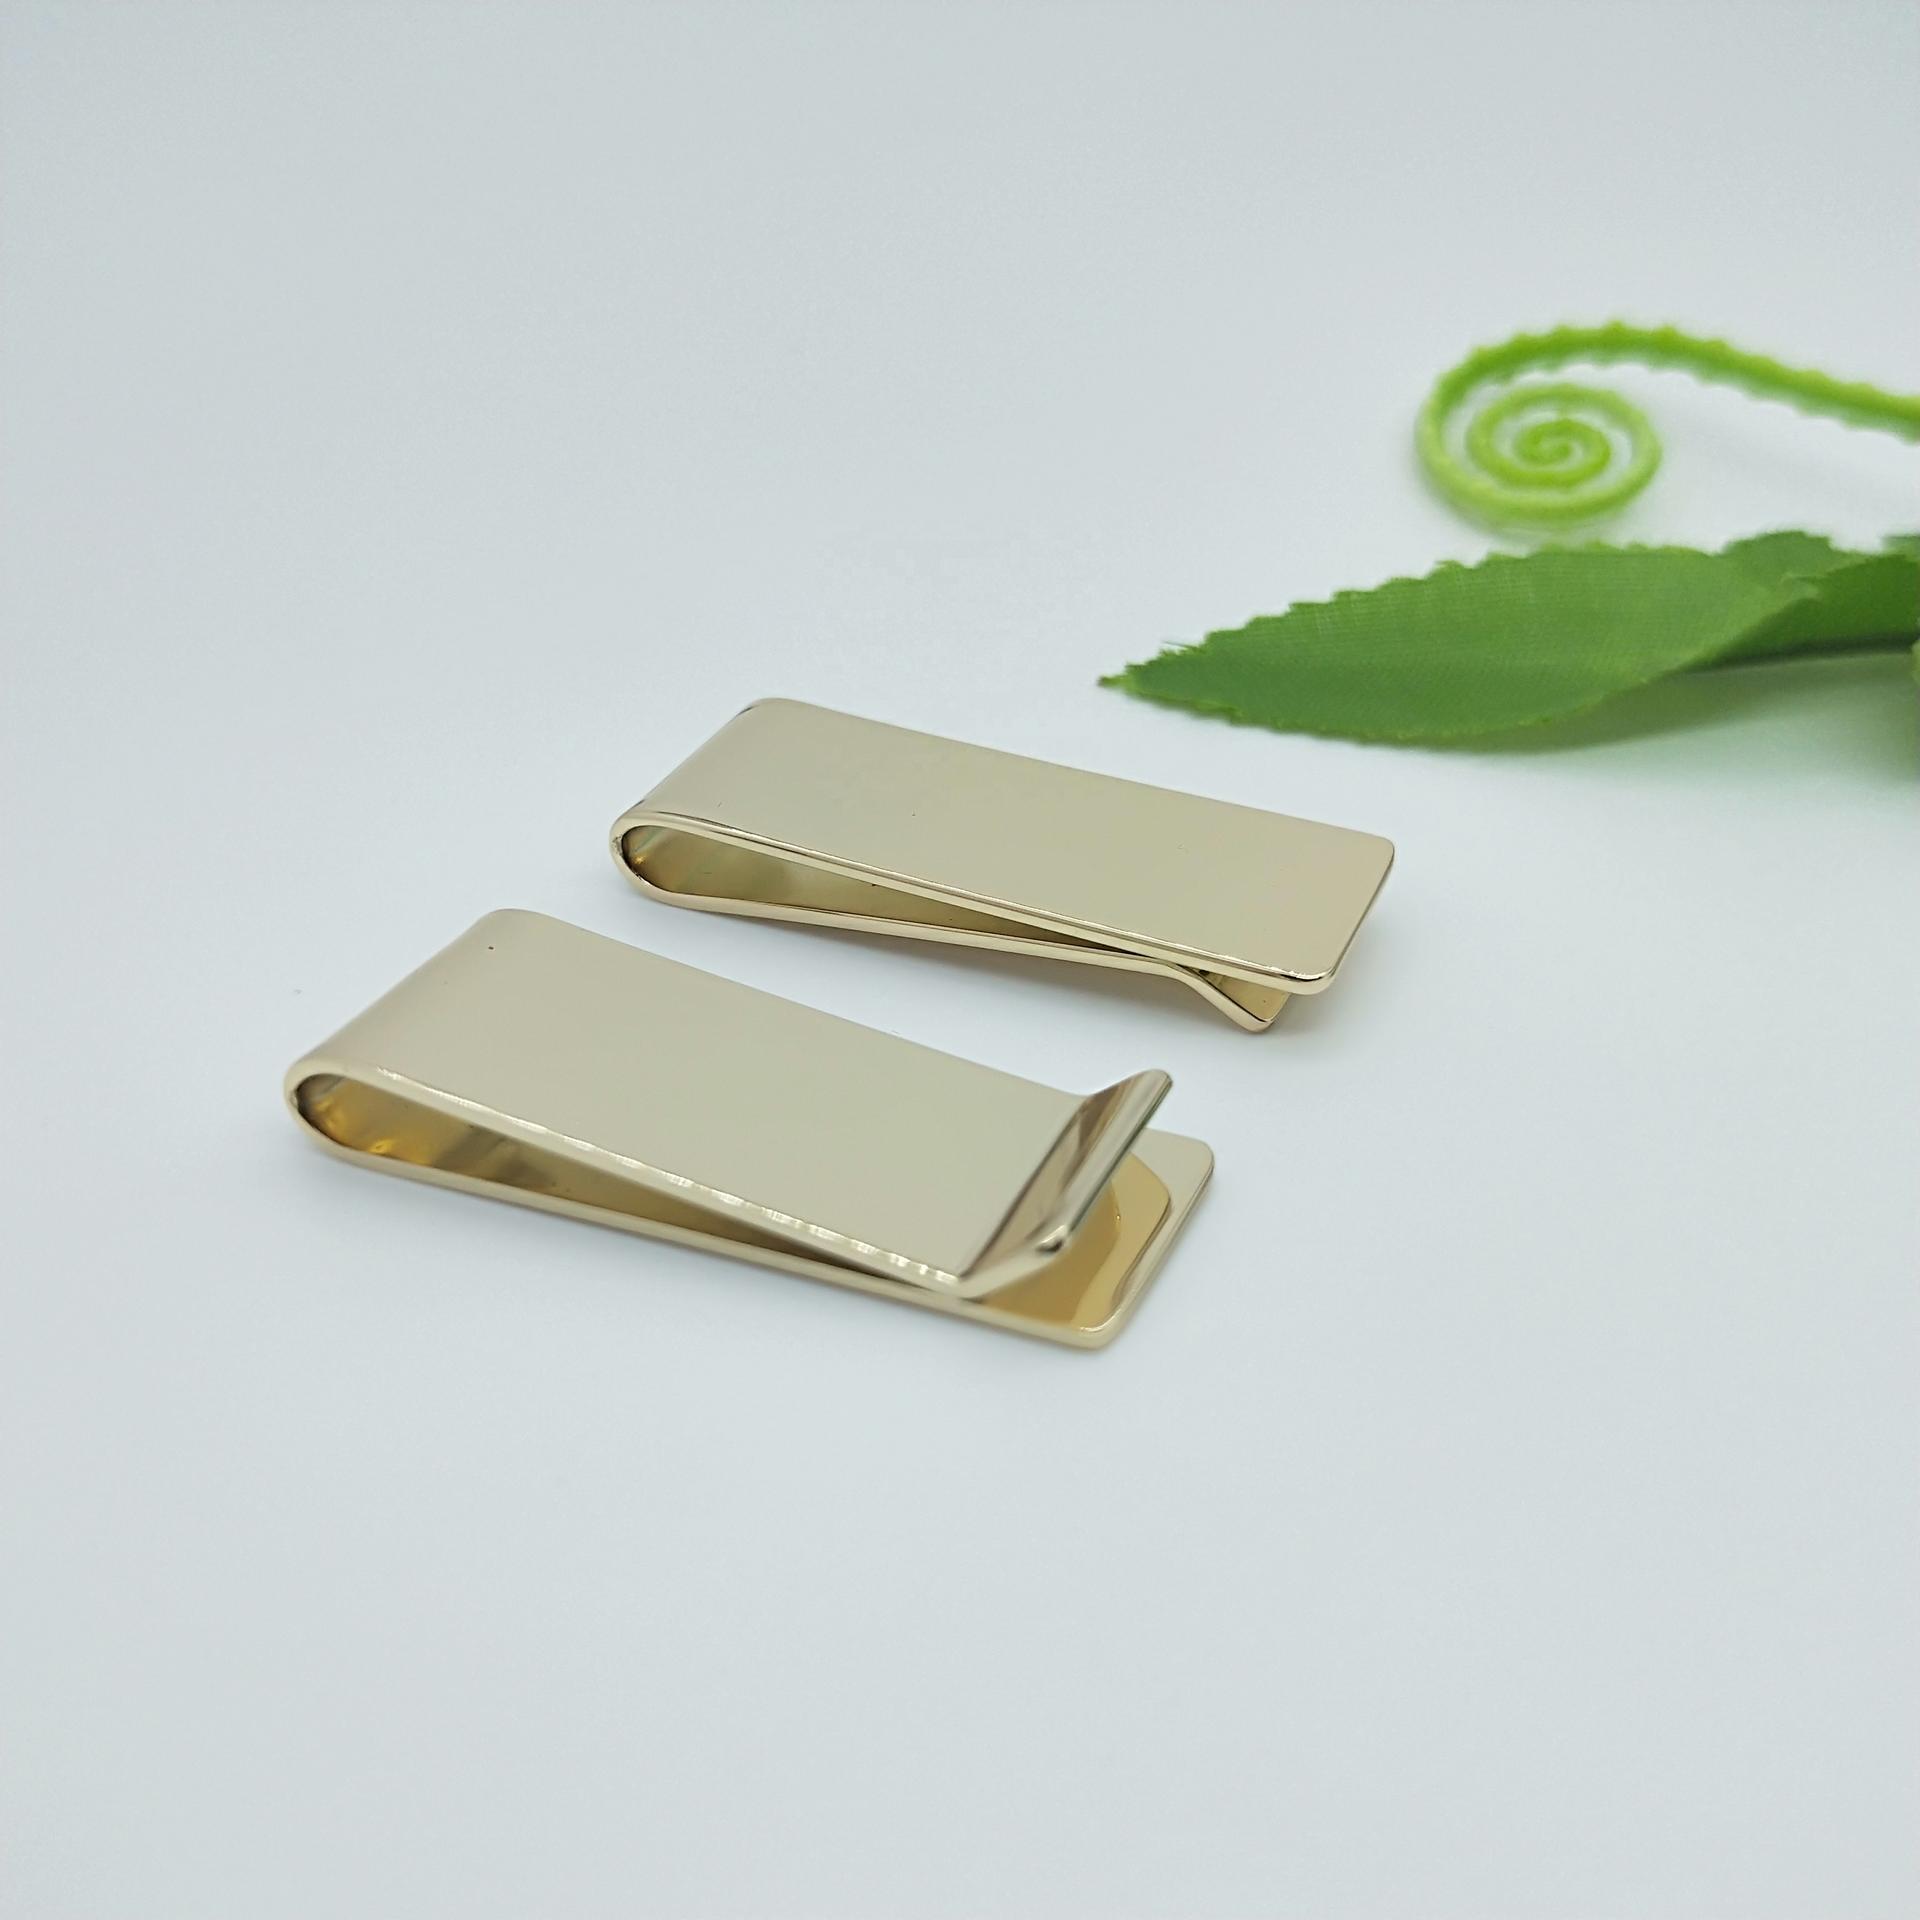 Top quality personalized gold plated money clip in brass